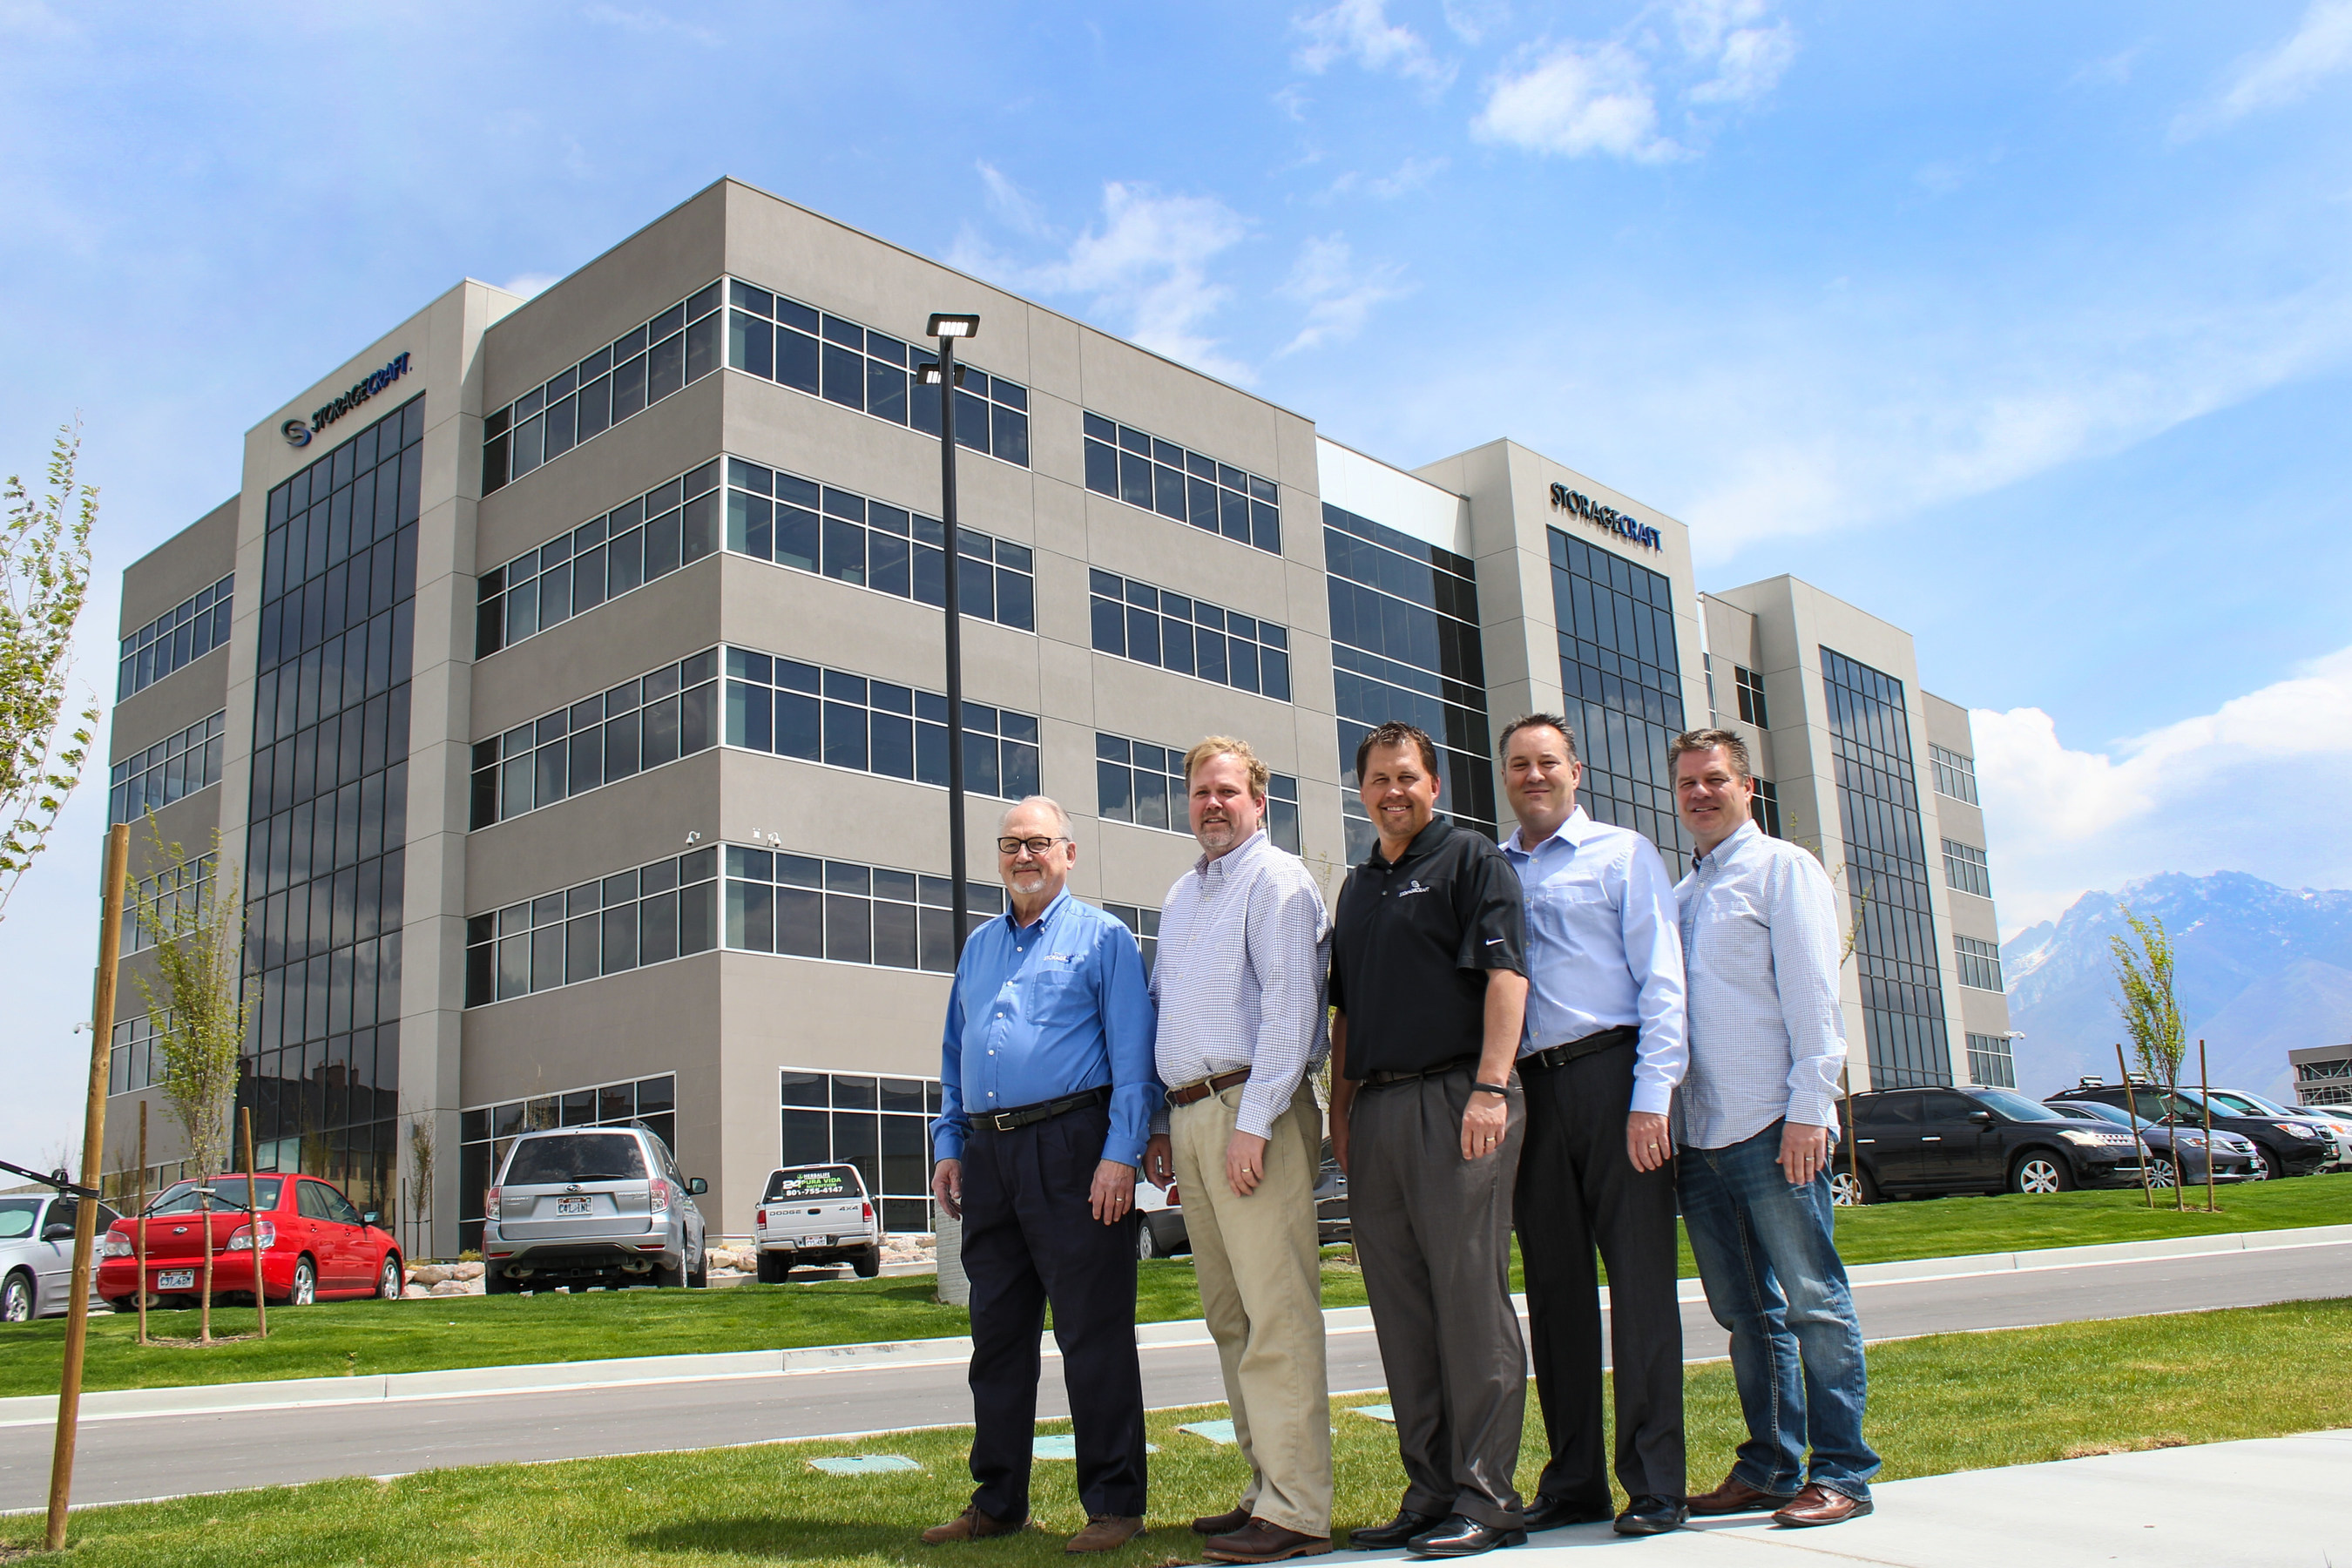 StorageCraft Technology Corp. officially opened today its new corporate headquarters facility in Draper, Utah. Since its founding in 2003, StorageCraft has become a global leader in backup and disaster recovery of IT systems. Pictured from left to right are StorageCraft's five founders: CEO Jeff Shreeve, COO Russ Shreeve, Vice President of Product Management Brandon Nordquist, Vice President of Marketing and Business Development Curt James and Chief Technology Officer Scott Barnes.